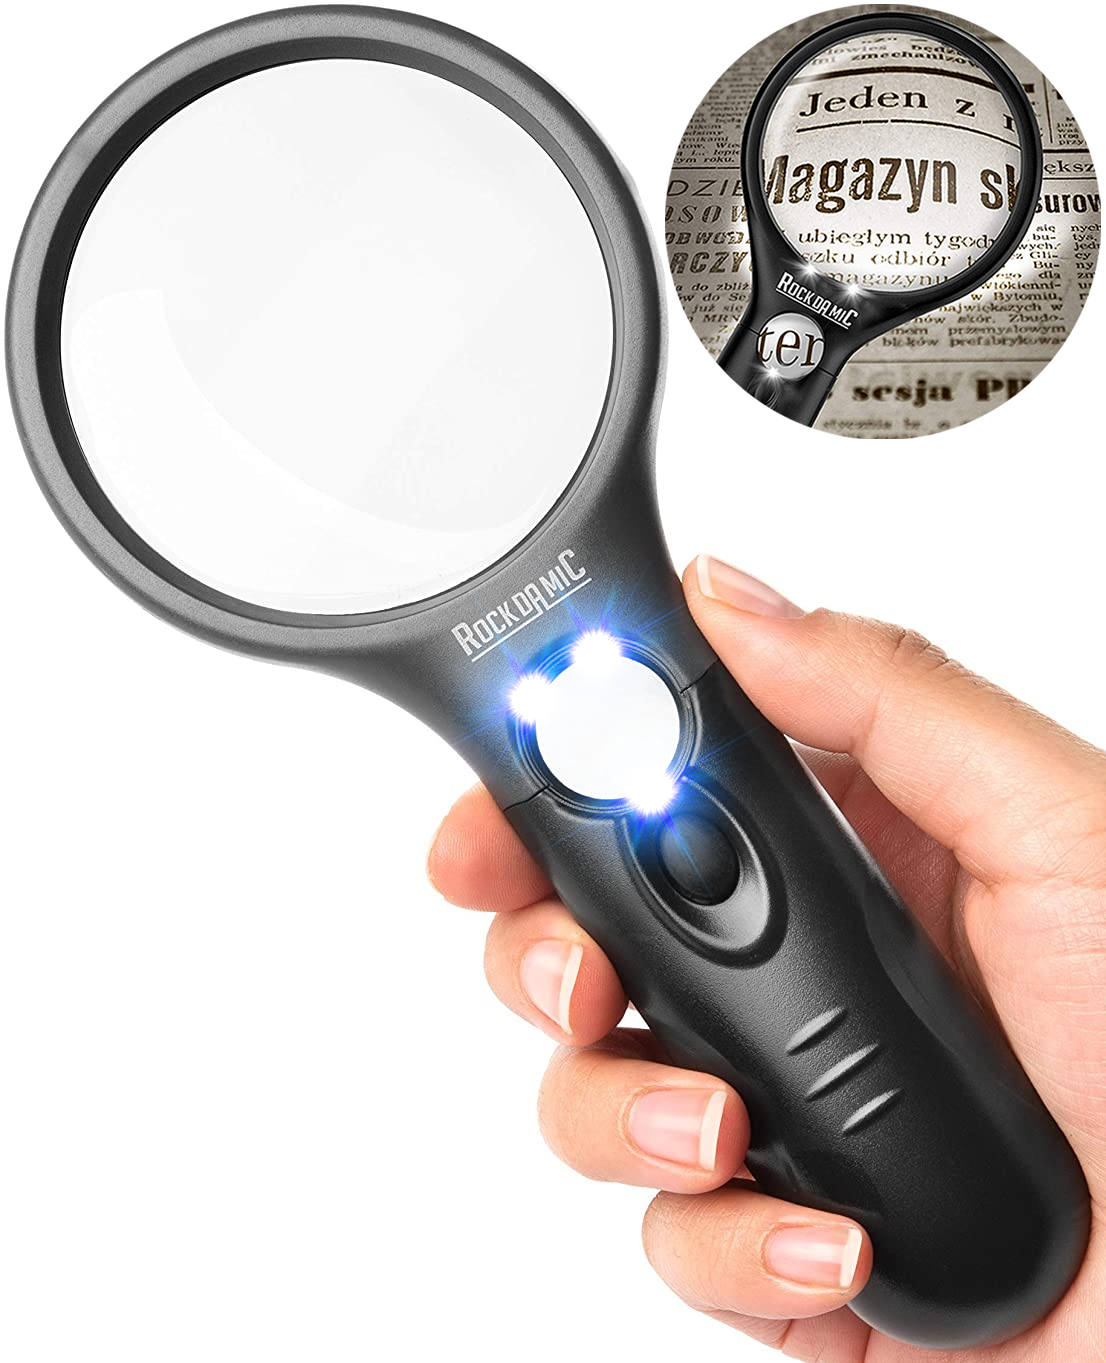 RockDaMic Professional Magnifying Glass with Light (3X / 45x) Large Lighted Handheld Glass Magnifier Lupa for Reading, Jewelry, Coins, Stamps, Fine Print - Strongest Magnify for Kids & Seniors - image 1 of 11